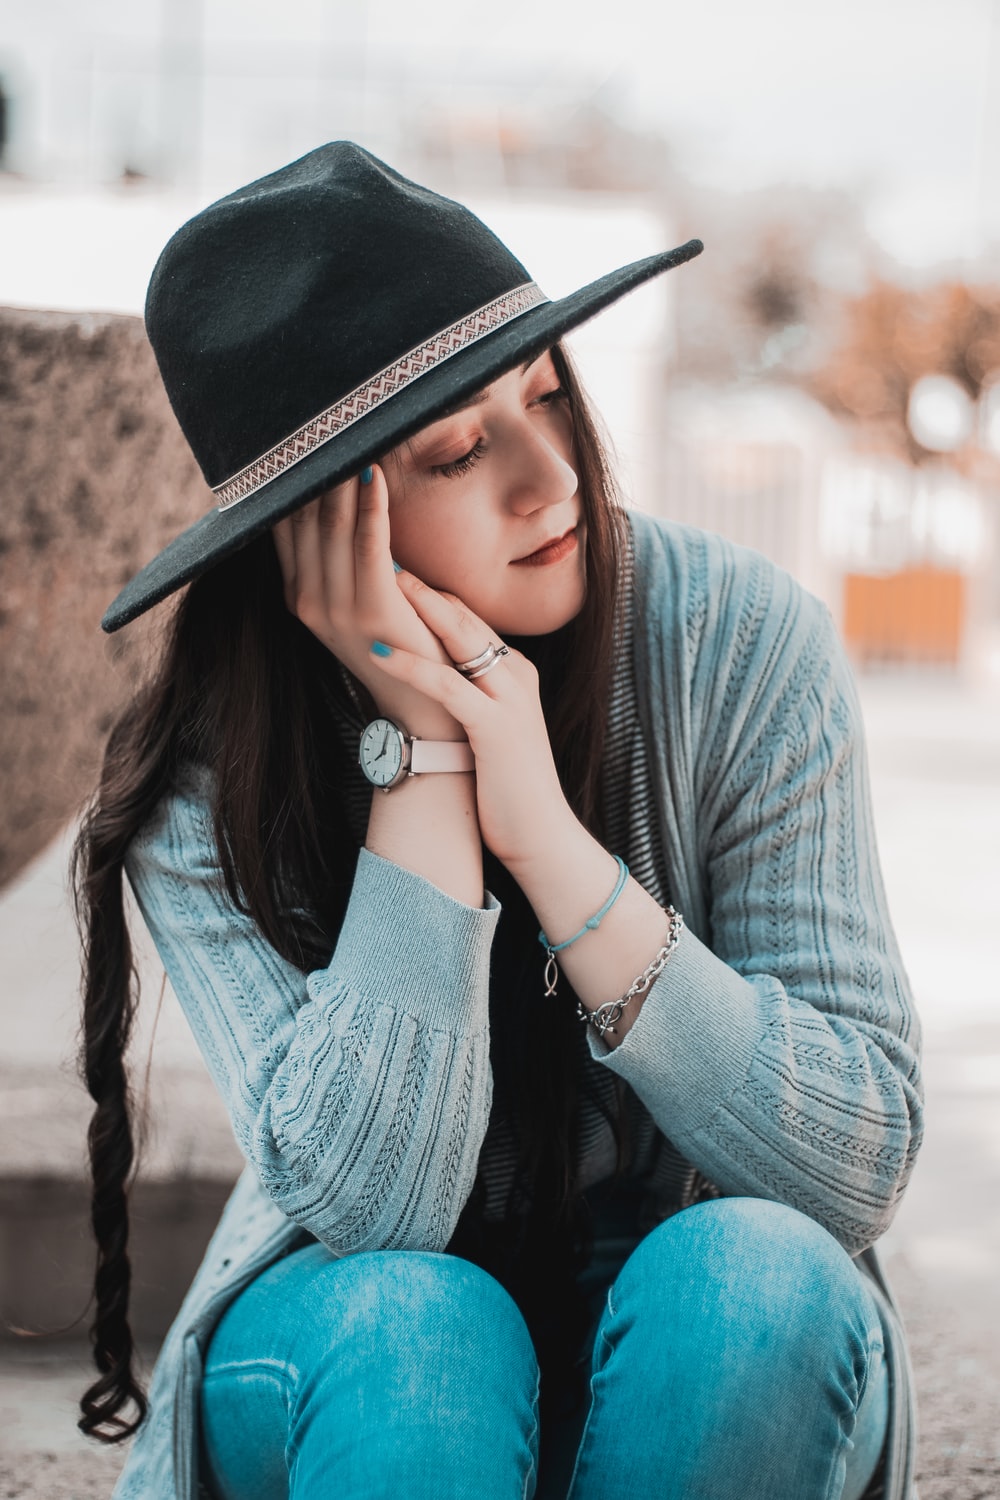 Girl In A Hat Picture. Download Free Image